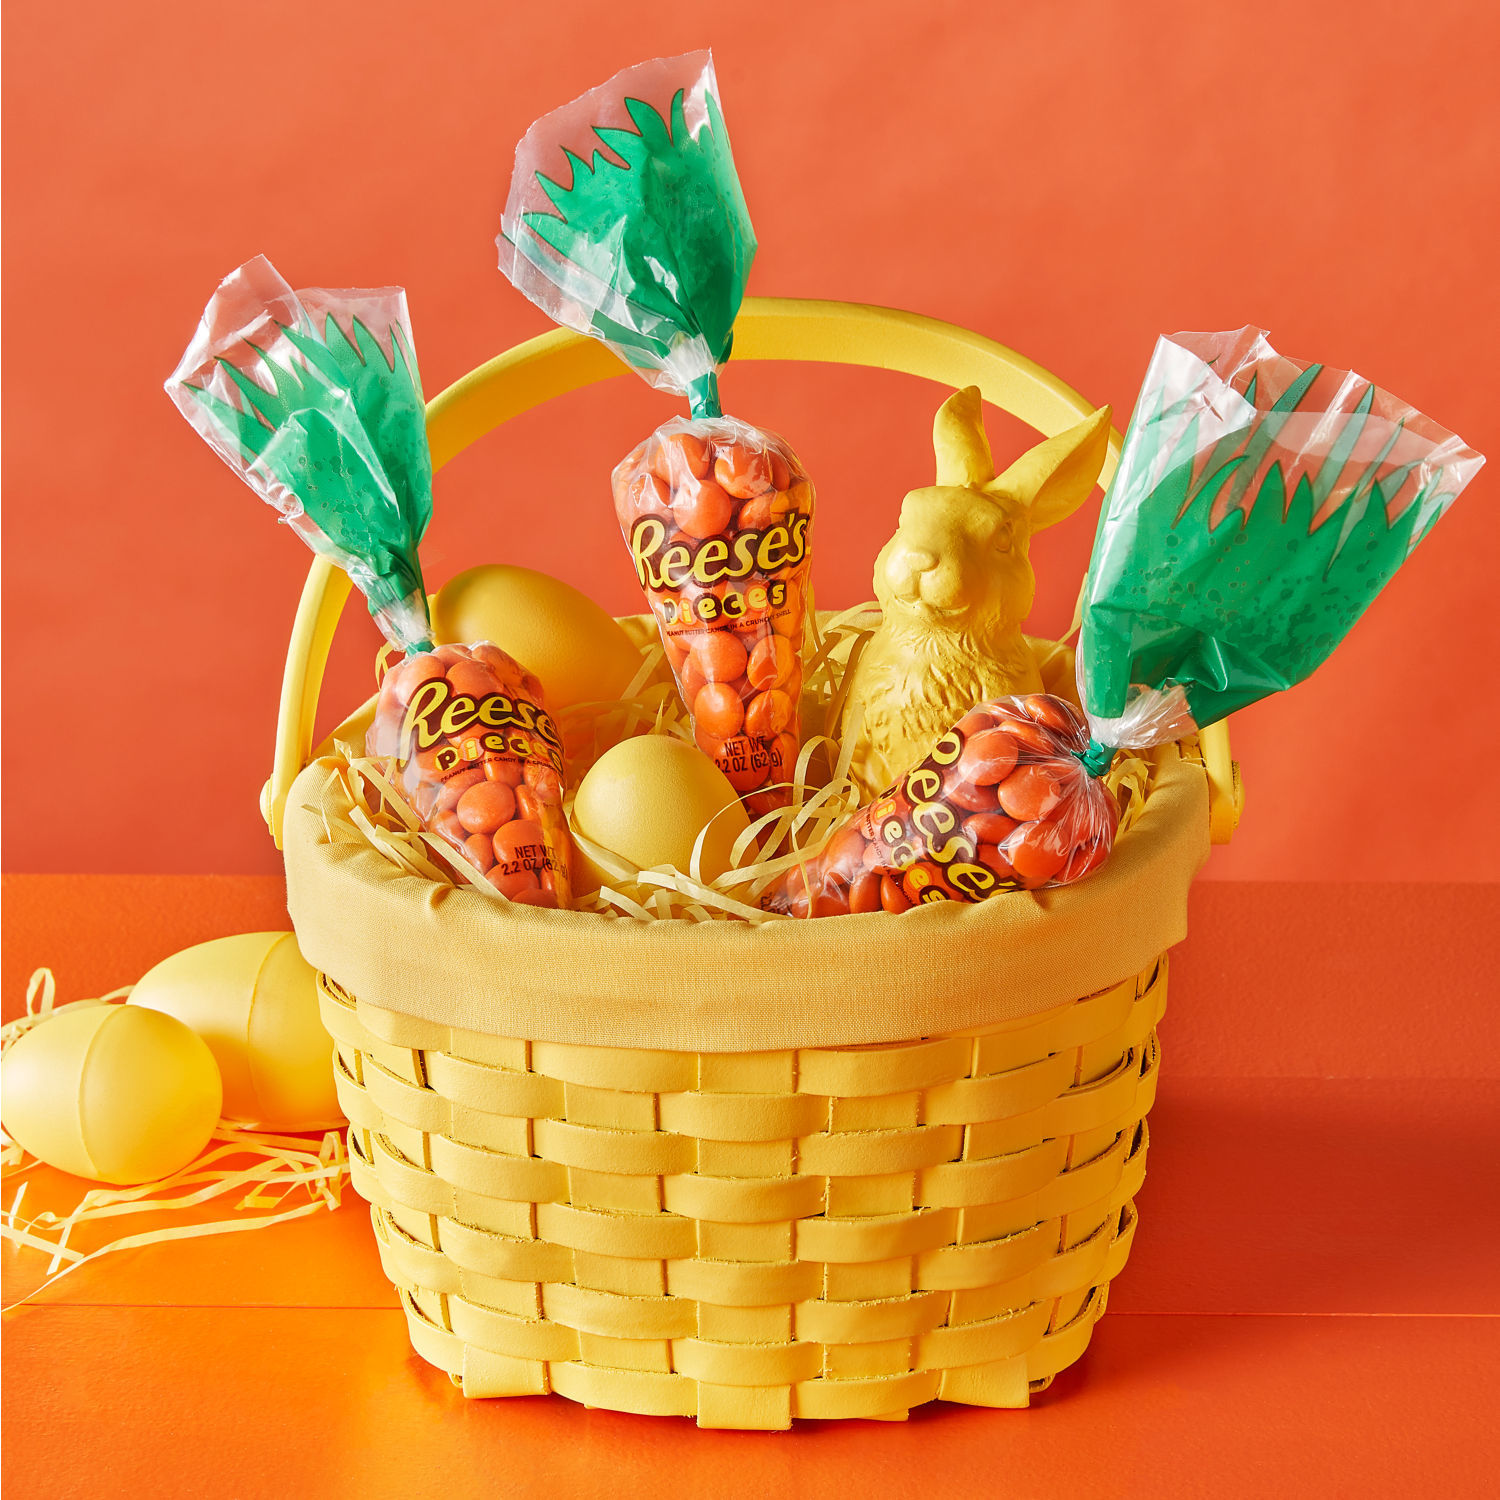 REESE'S, PIECES Peanut Butter in a Crunchy Shell Treats, Easter Candy, 2.2 oz, Carrot Bag - image 4 of 6